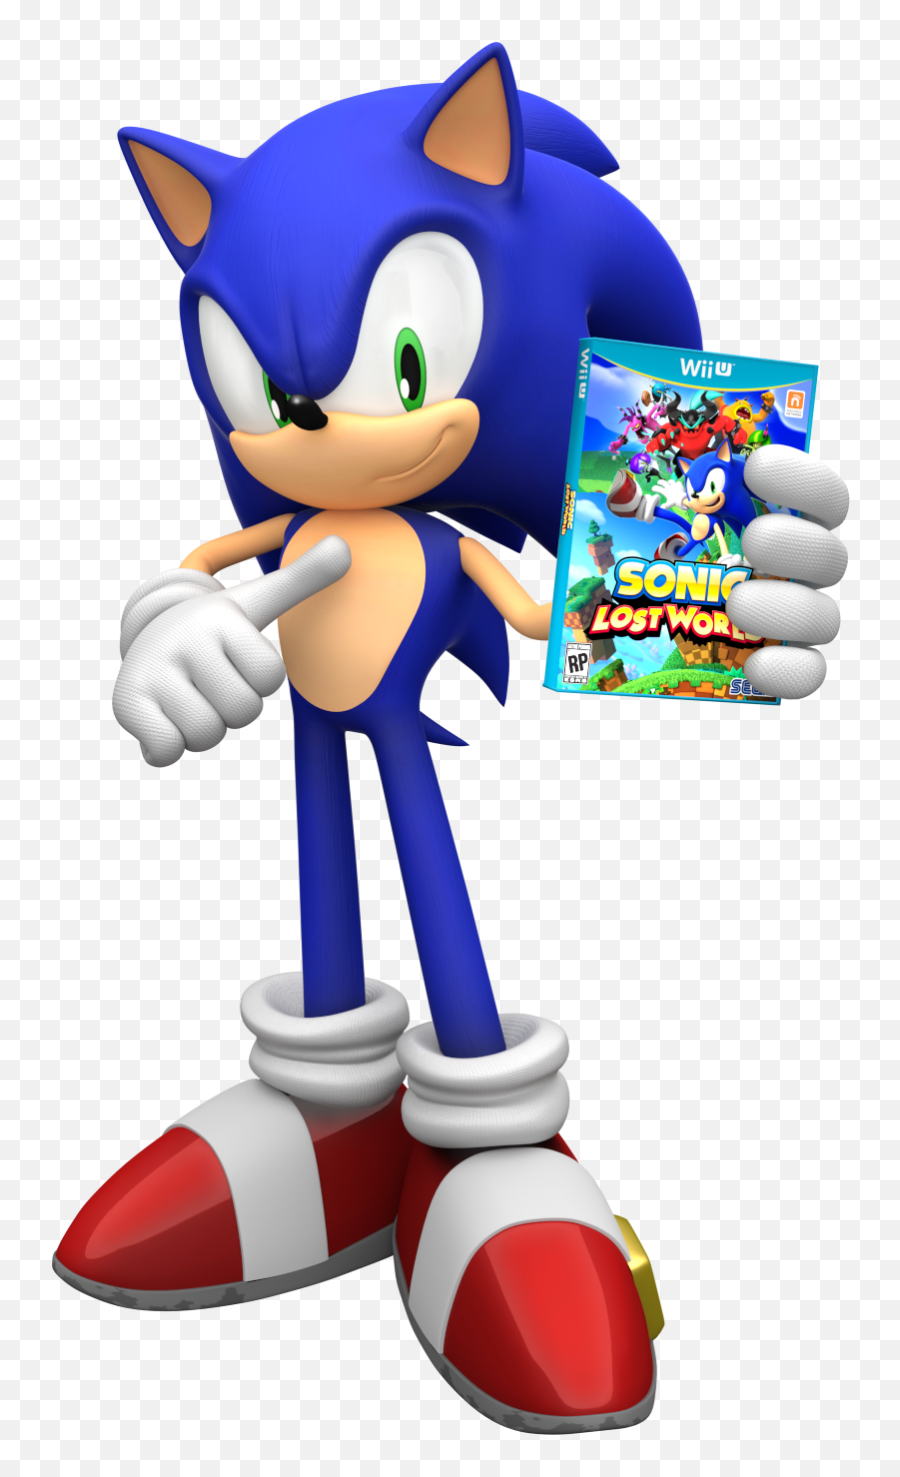 Sonic Lost World Wii U Game - Disney Infinity Sonic The Hedgehog Png,Sonic Lost World Logo